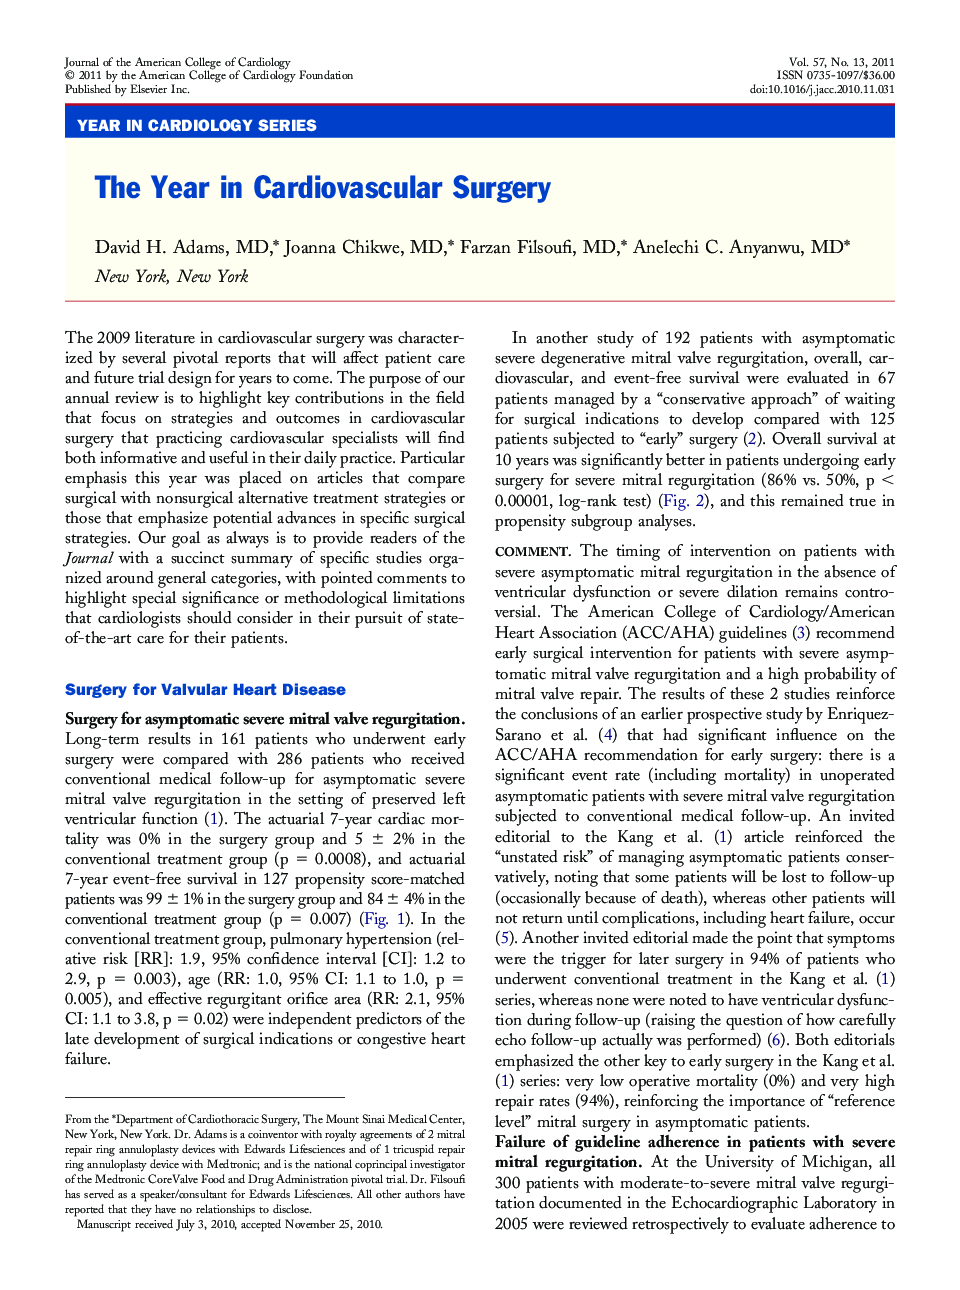 The Year in Cardiovascular Surgery